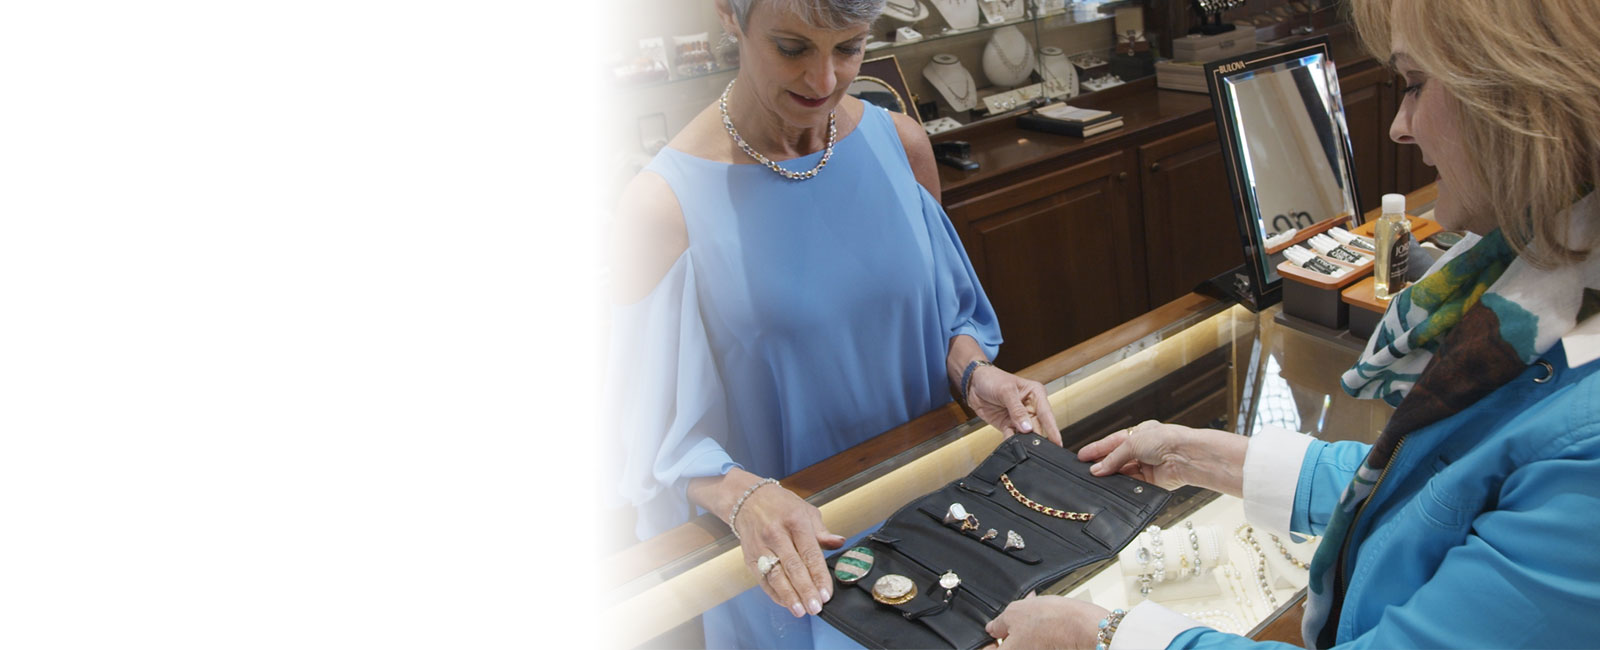 Jewelry Sales in West Chester, PA | Sunset Hill Jewelers